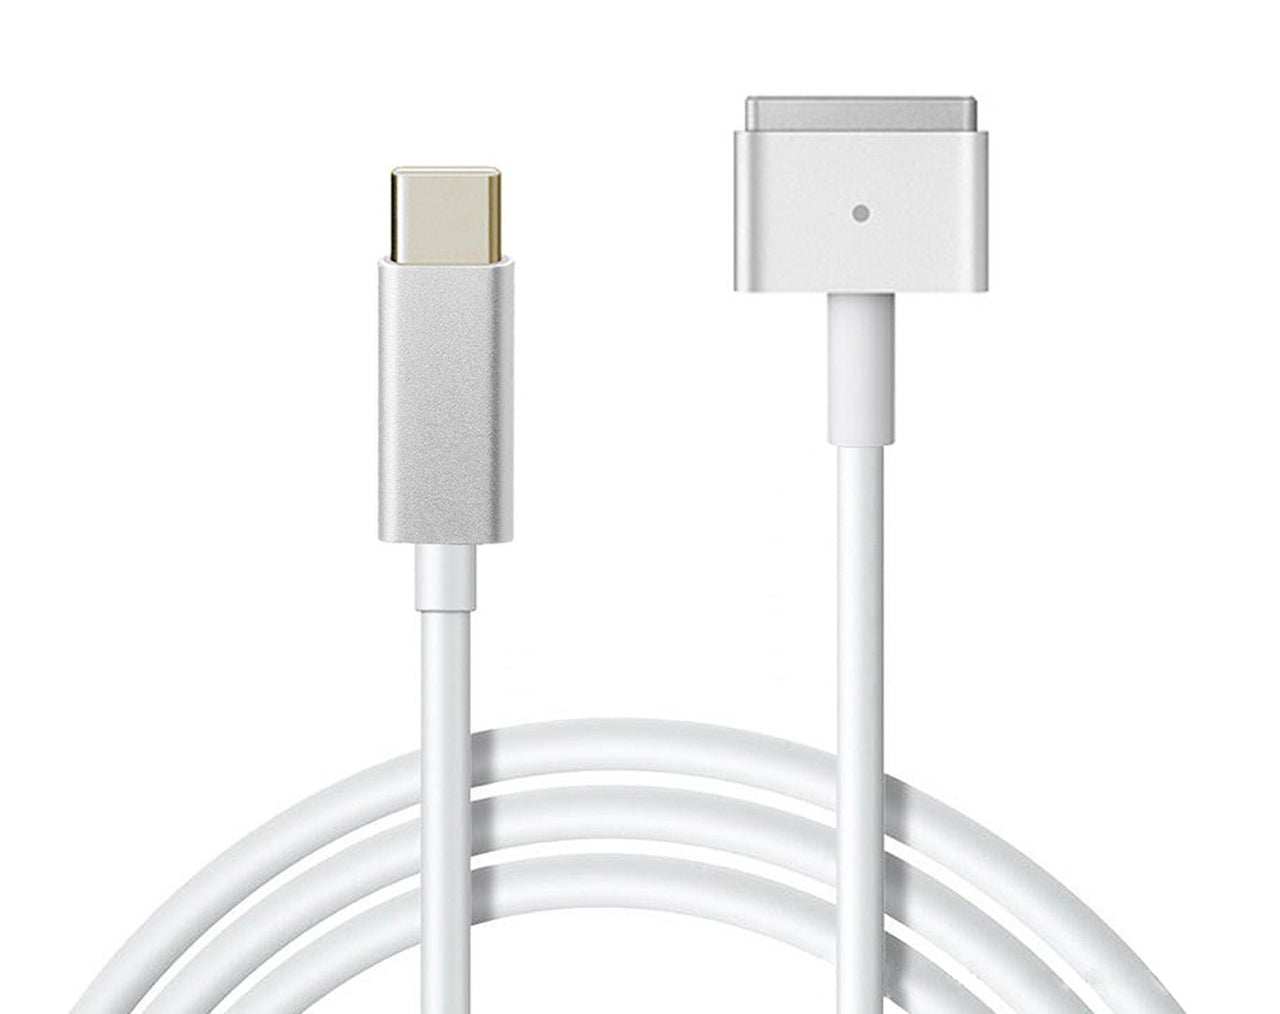 MagSafe 2 Style (T-Tip) to USB Type-C Macbook Pro Charge Cable 1.8m CTAT001 